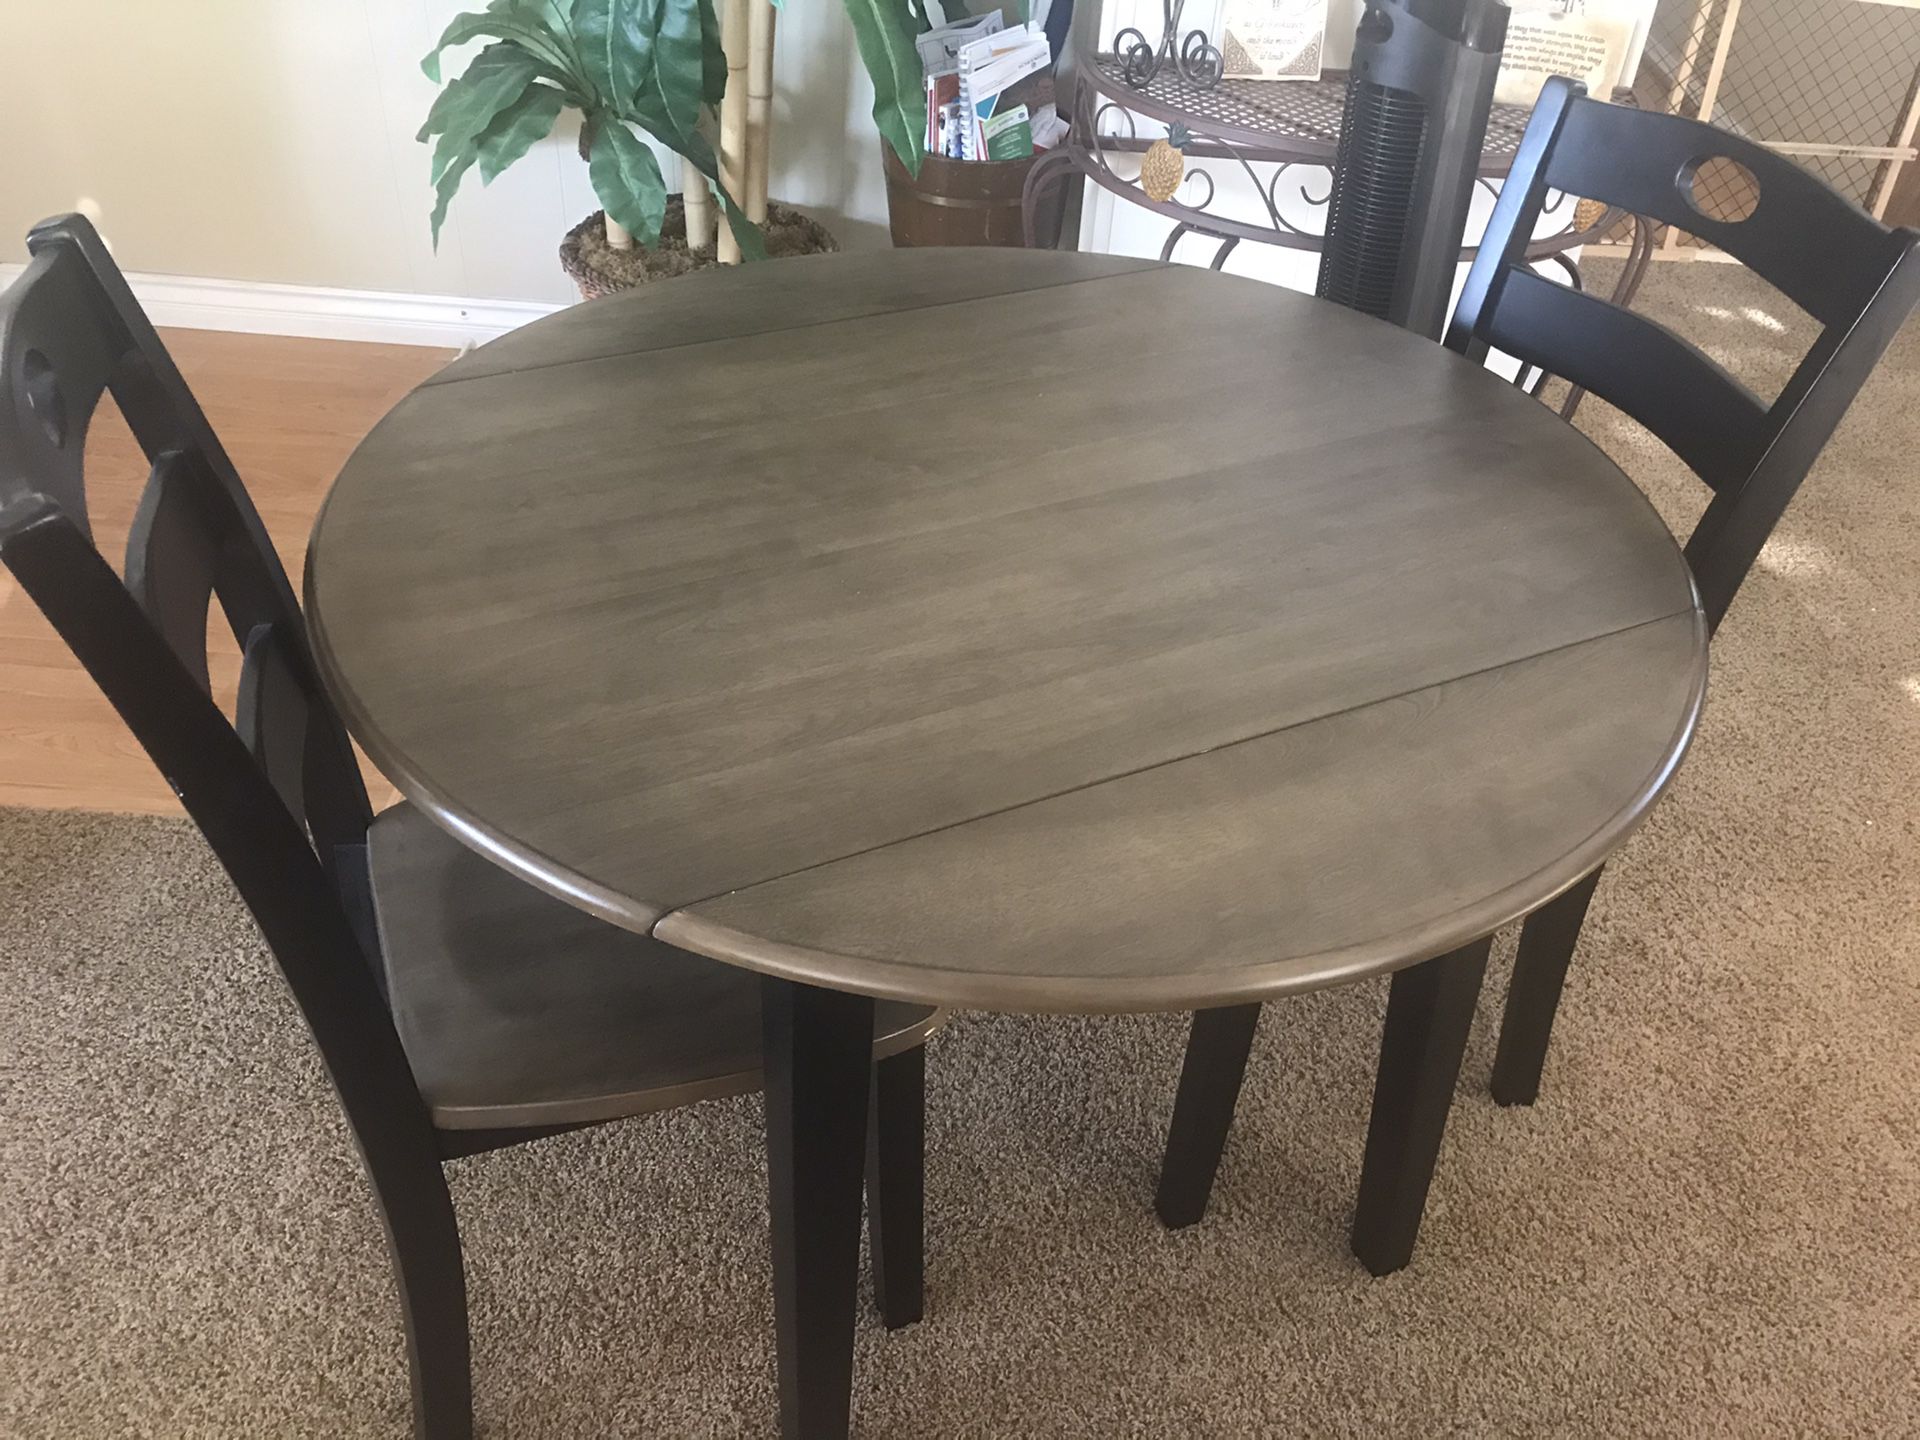 Very small Kitchen table